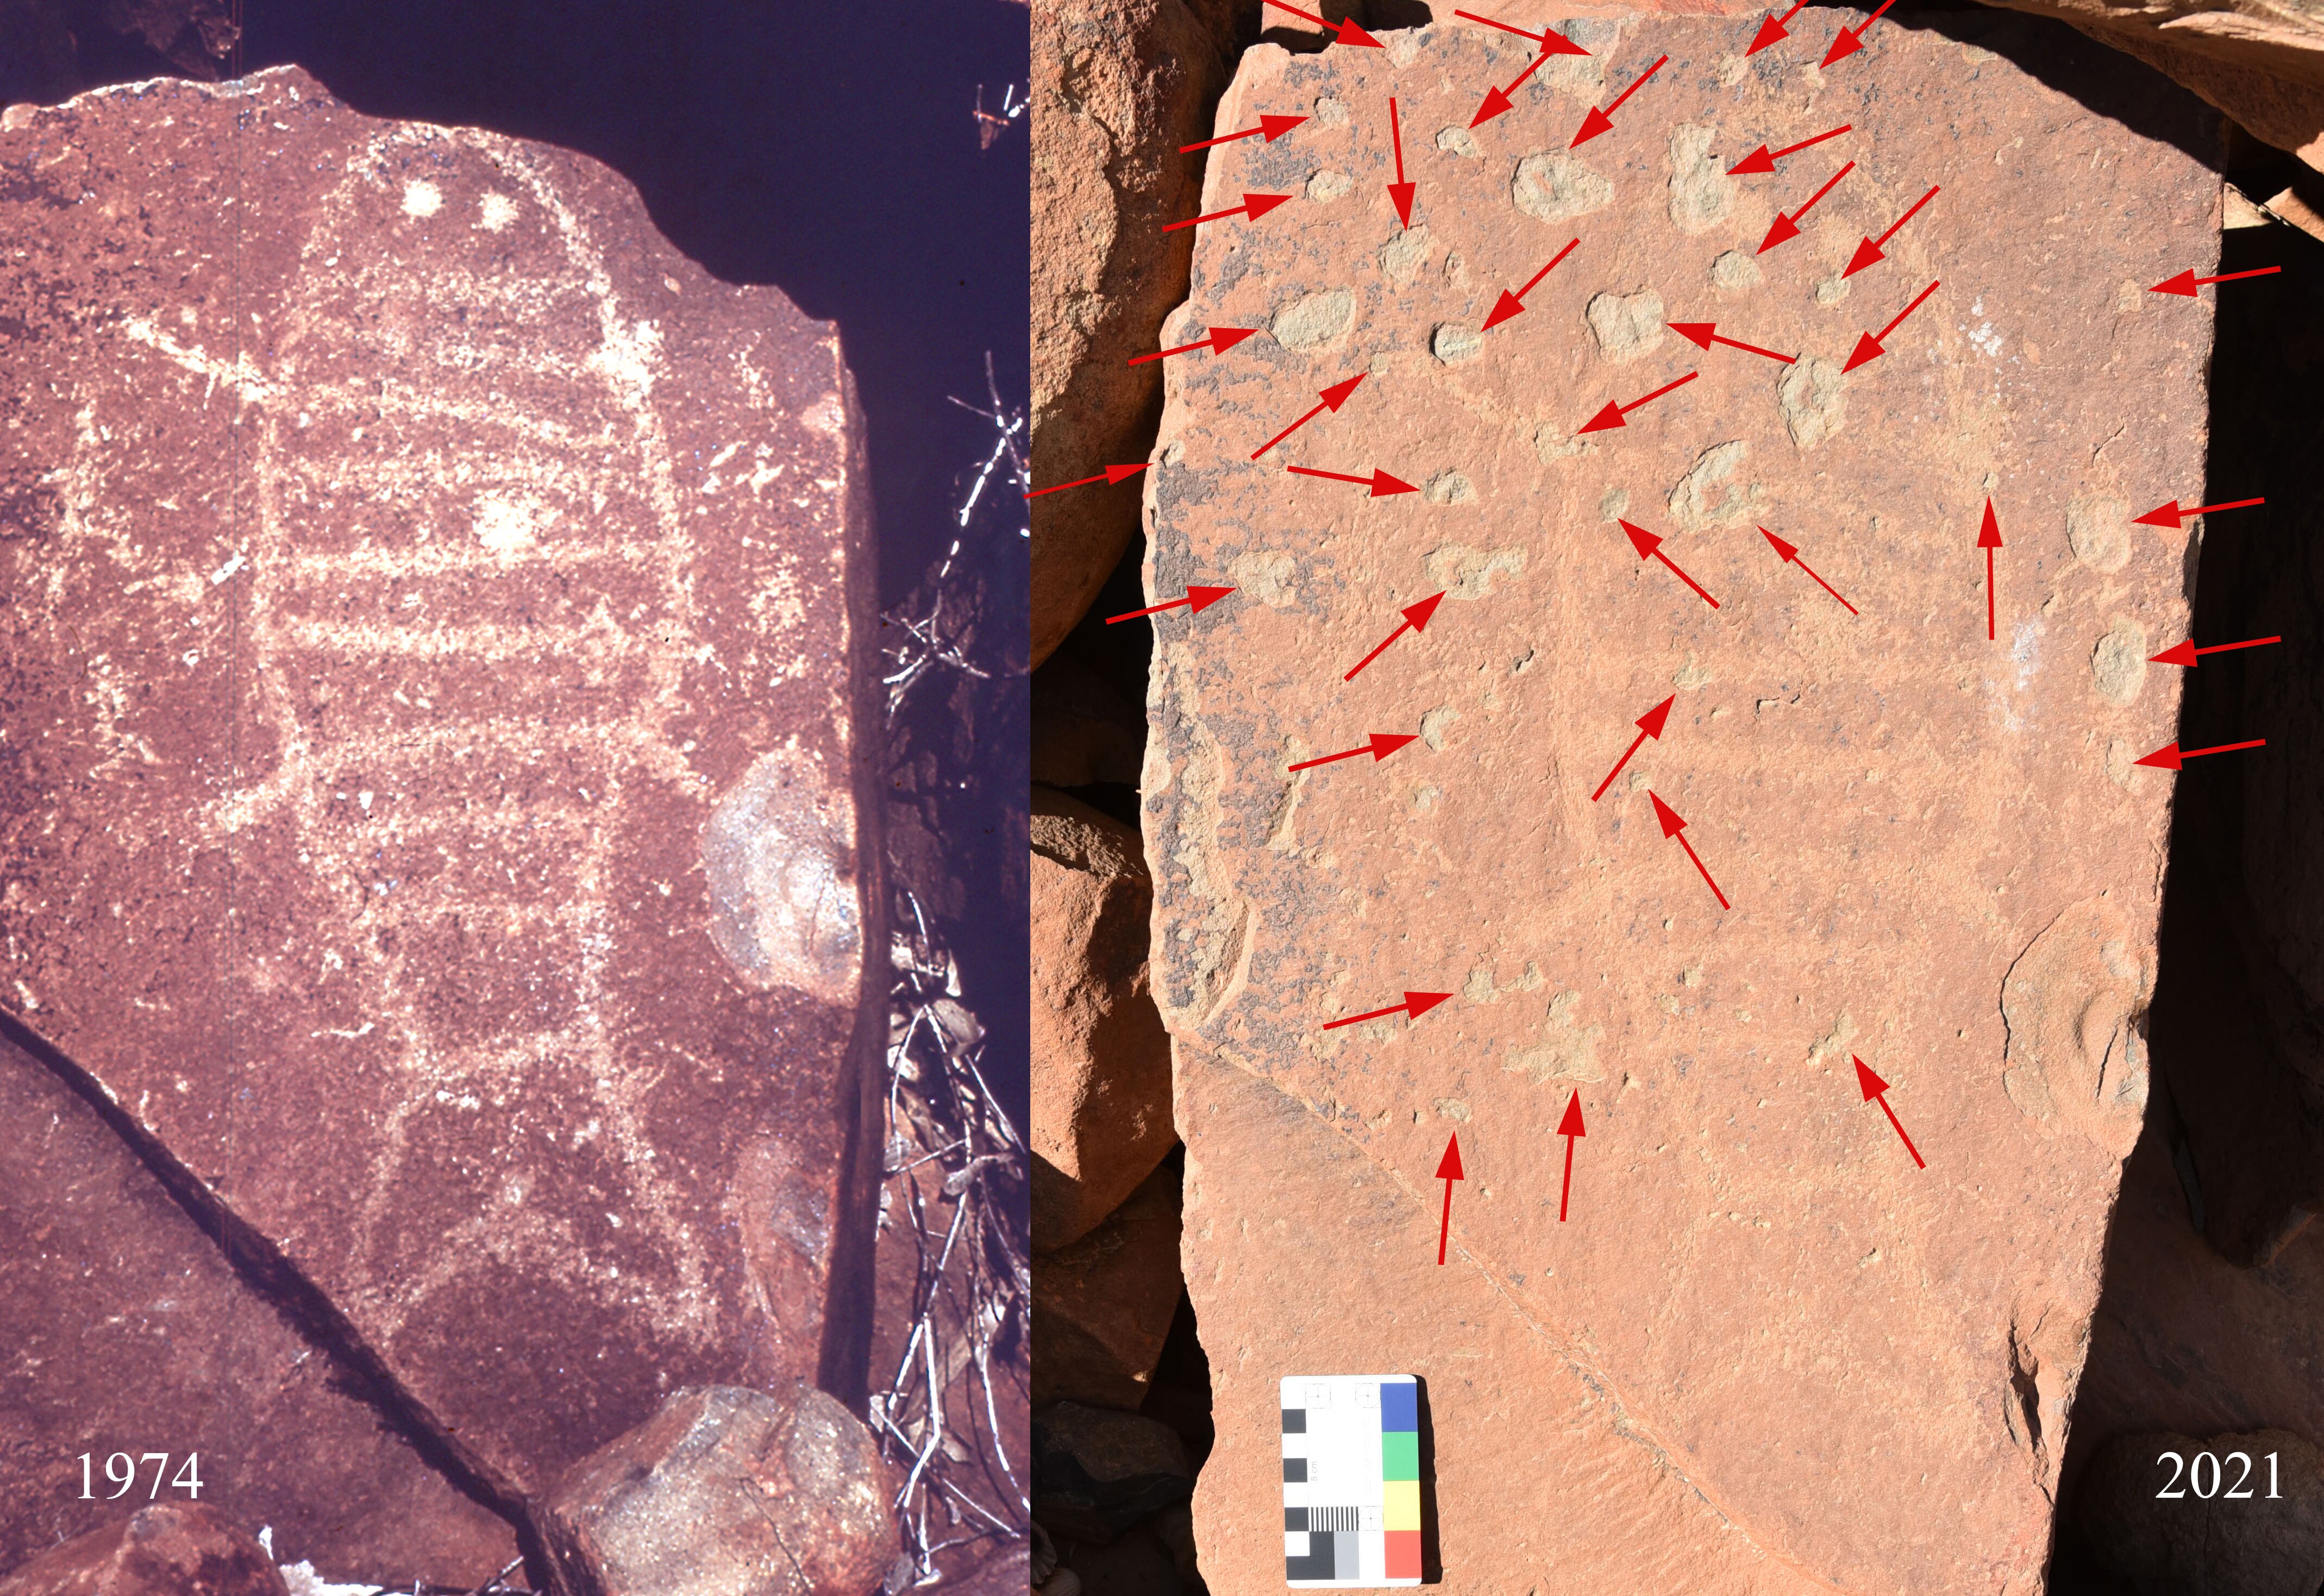 Two views of rock art taken about 50 years apart, one is faded compared to the other 